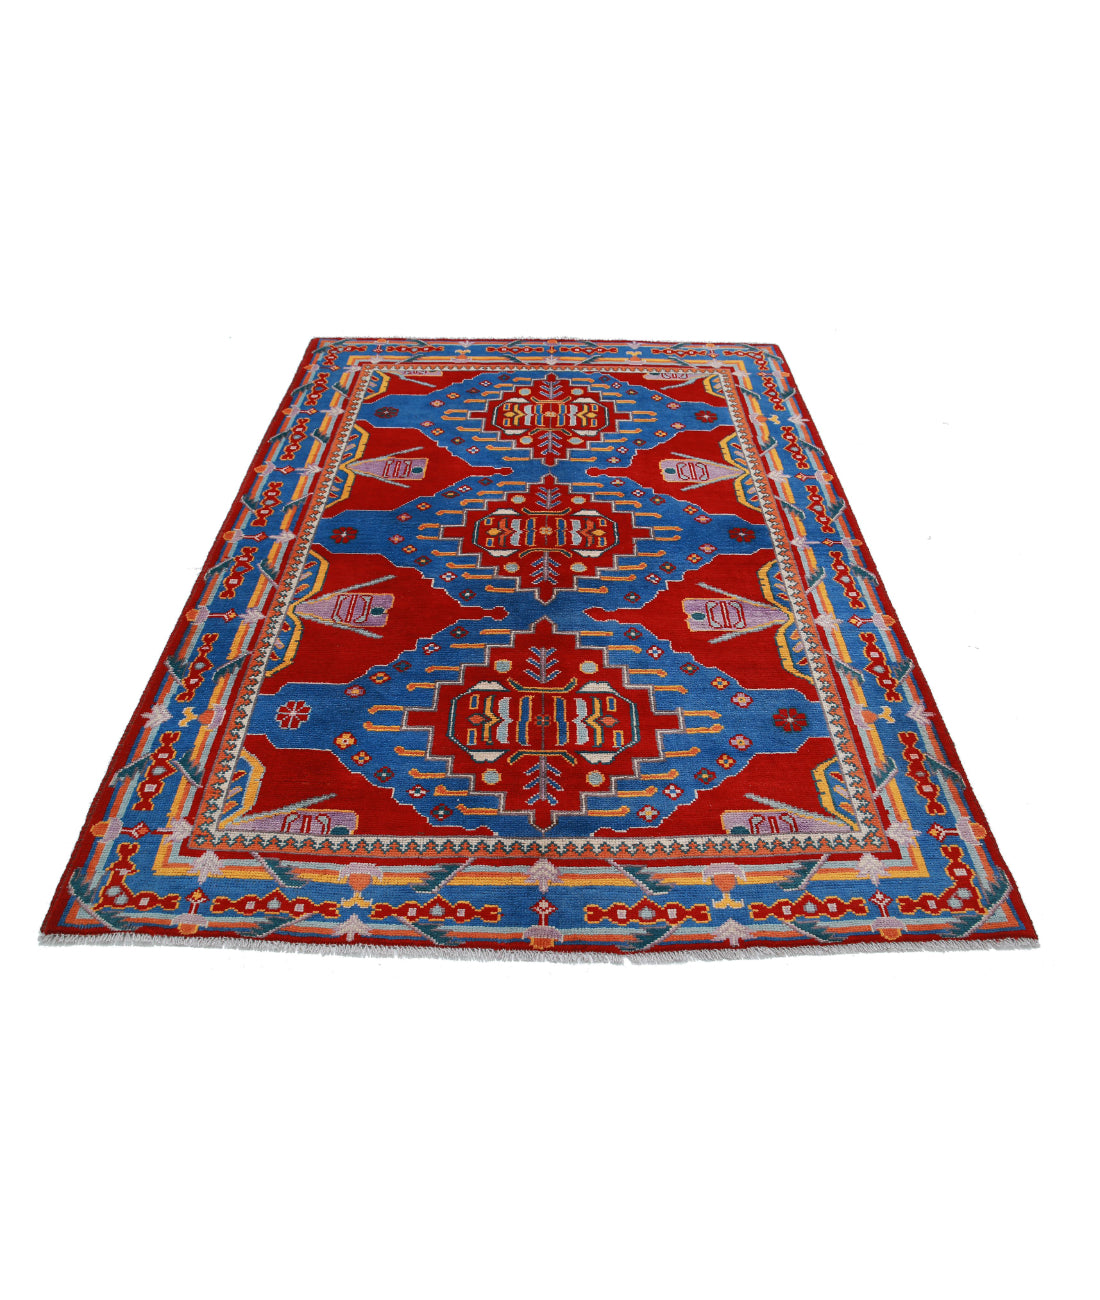 Revival 5'8'' X 7'7'' Hand-Knotted Wool Rug 5'8'' x 7'7'' (170 X 228) / Red / Blue